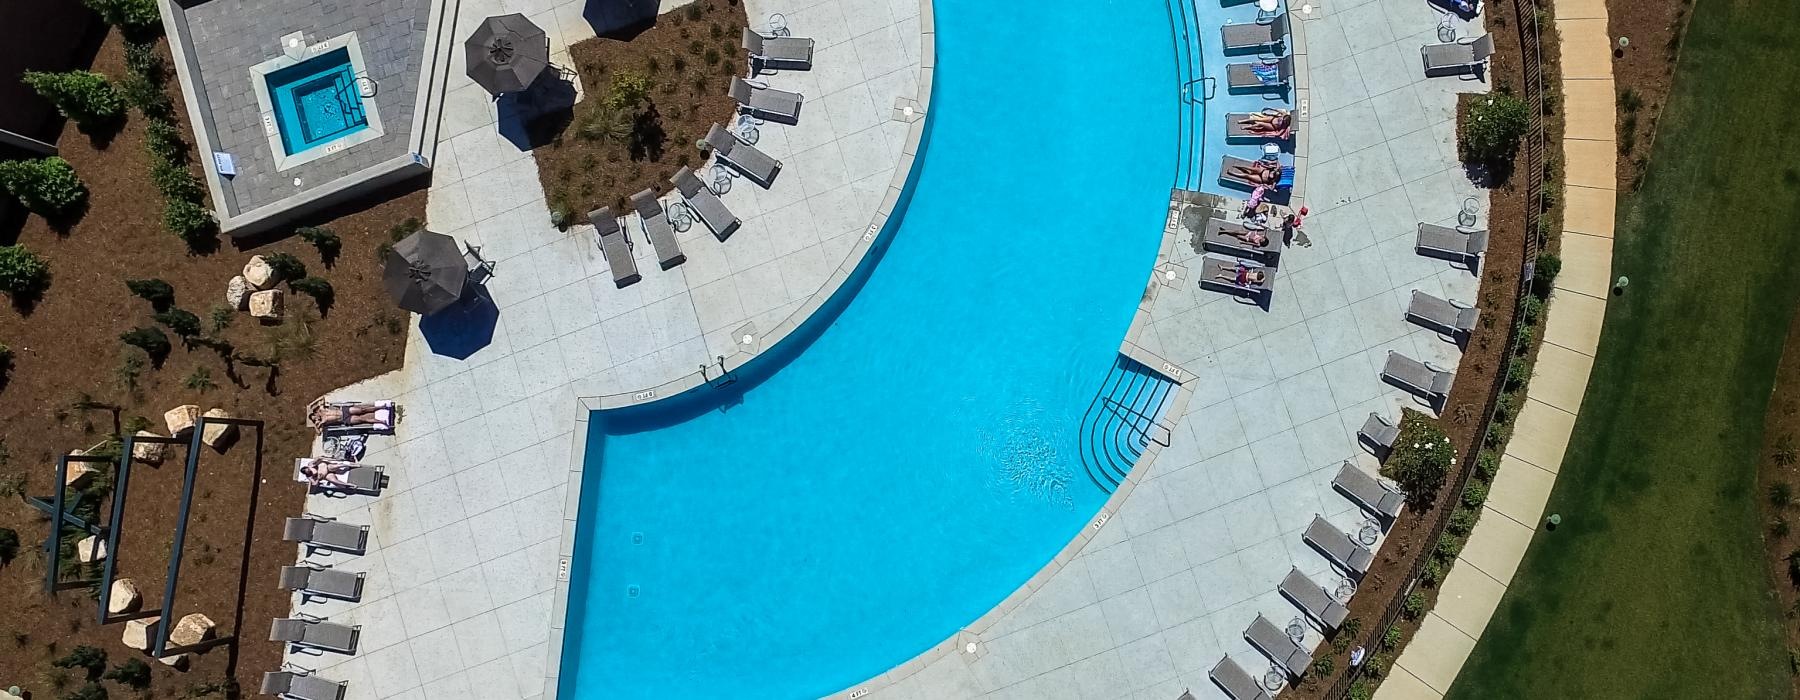 a pool with people around it